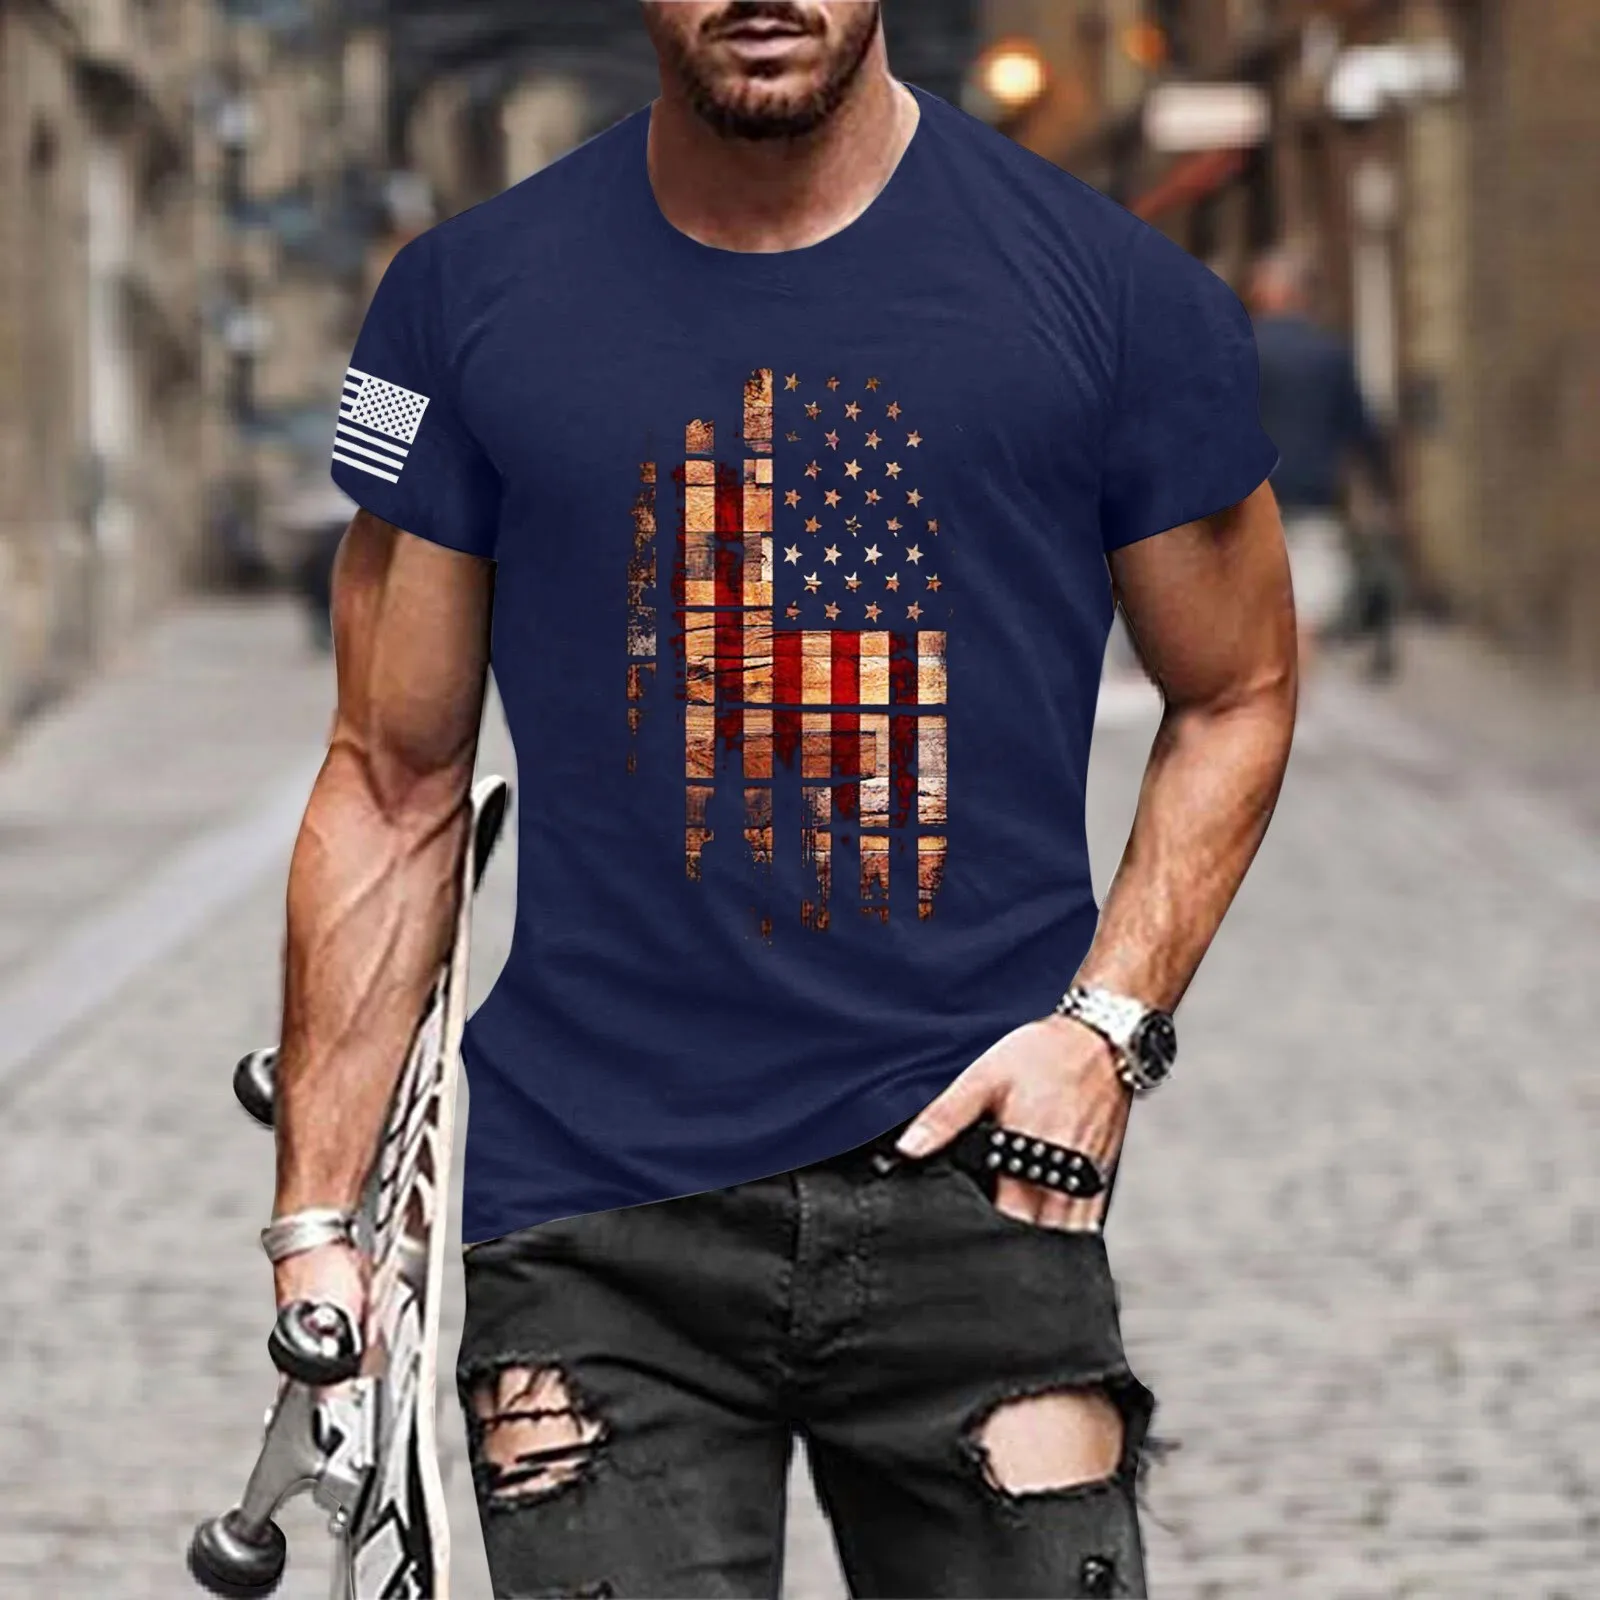 

Mens All Shirts Mens Summer Independence Day Fashion Casual Printed T Shirt Men T Shirts Casual Graphic 2xlt Shirts for Men